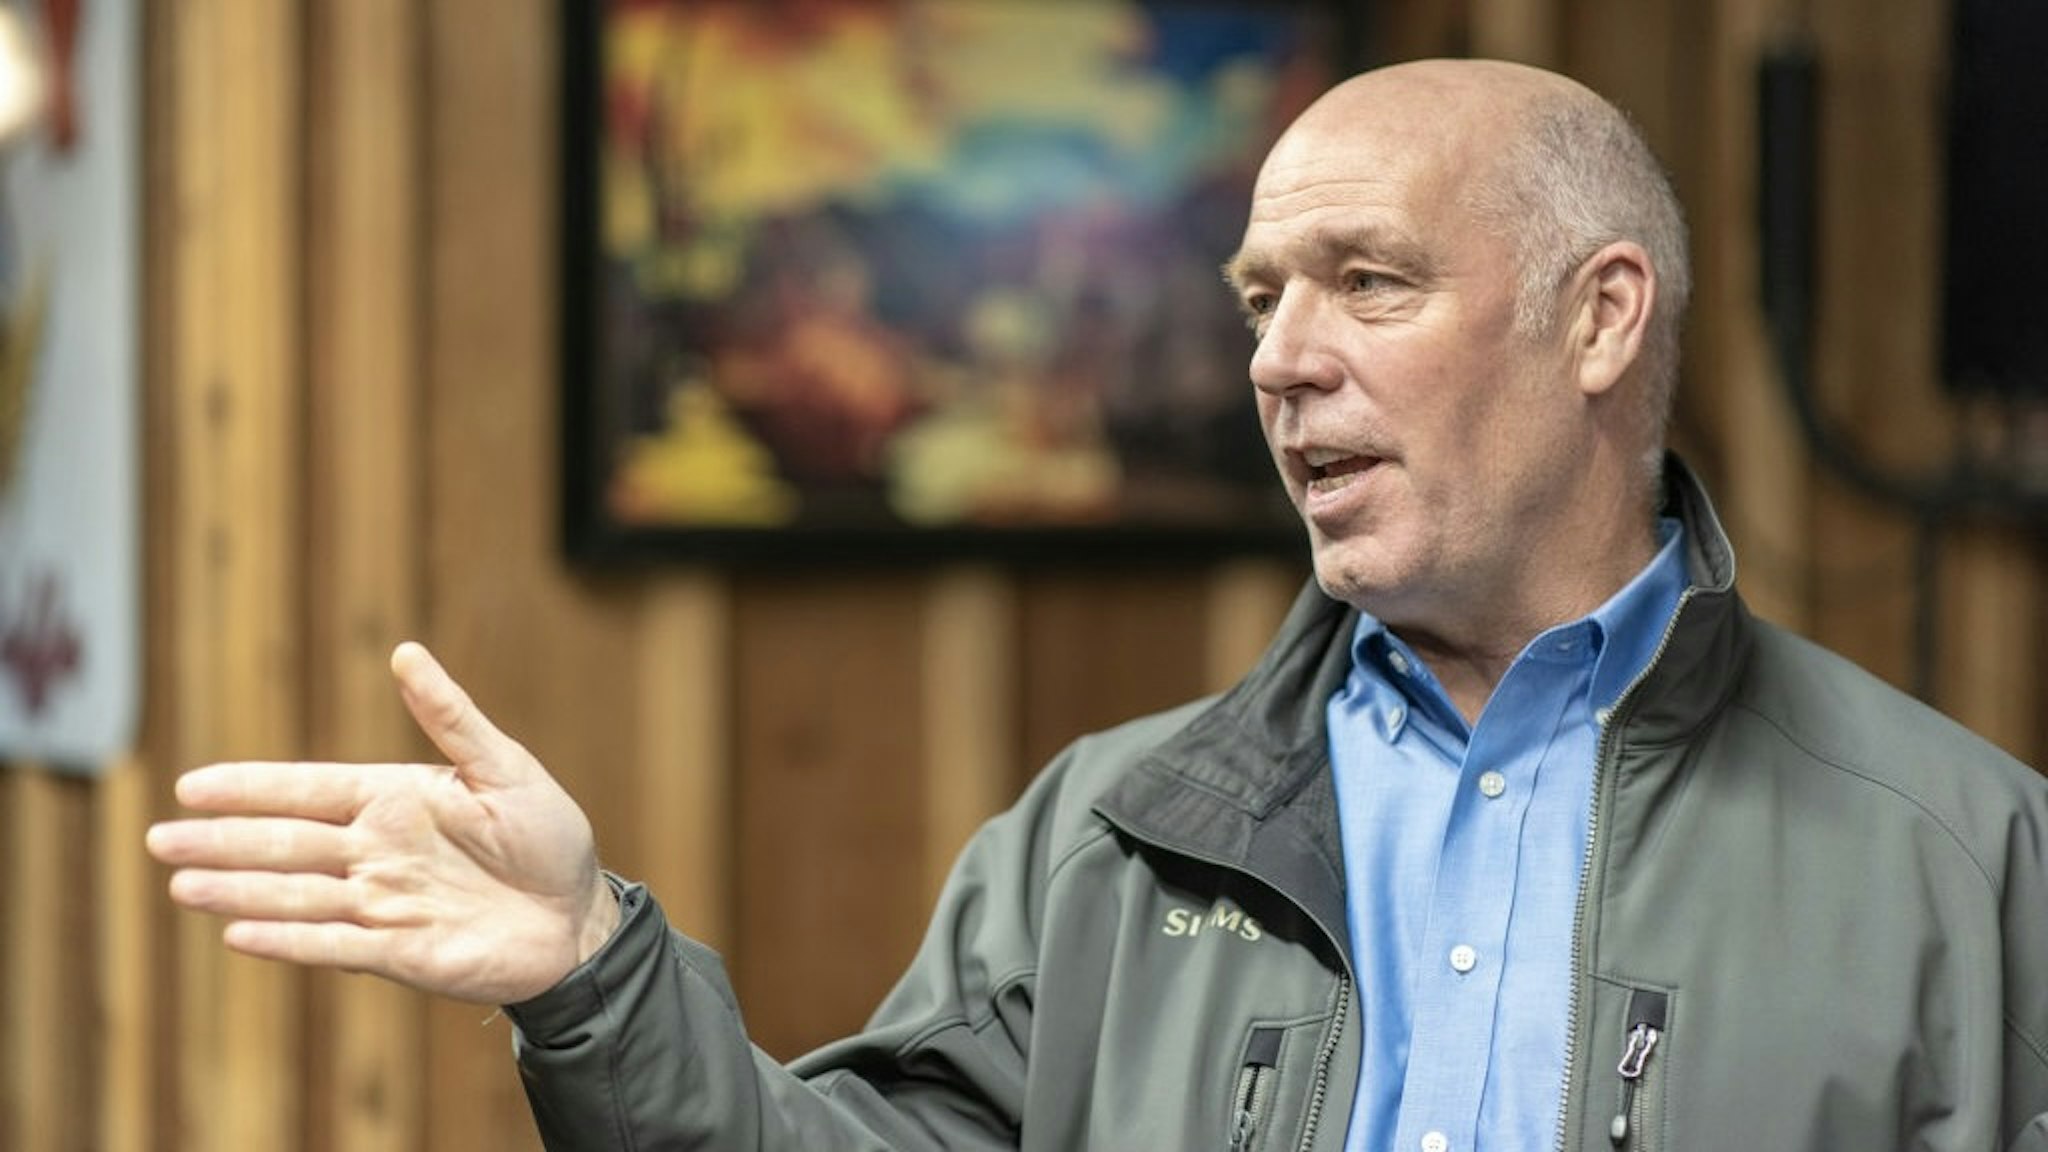 Montana GOP Rep. Greg Gianforte Advocates For Yellowstone Gateway Protection Act PRAY, MT- OCTOBER 10: Montana Republican Congressman Greg Gianforte meets with members of the business and environmental community at Chico Hot Springs below Emigrant Peak on October 10, 2018 in Pray, Montana. He gave the group a briefing on his bill the "Yellowstone Gateway Protection Act" which permanently withdraws mineral rights and bans mining on 30-thousand acres of public lands east of the Paradise Valley and north of Yellowstone National Park. Gianforte is running against Democrat Kathleen Williams for Montana's lone house seat in the 2018 midterm elections. (Photo by William Campbell-Corbis via Getty Images) William Campbell / Contributor